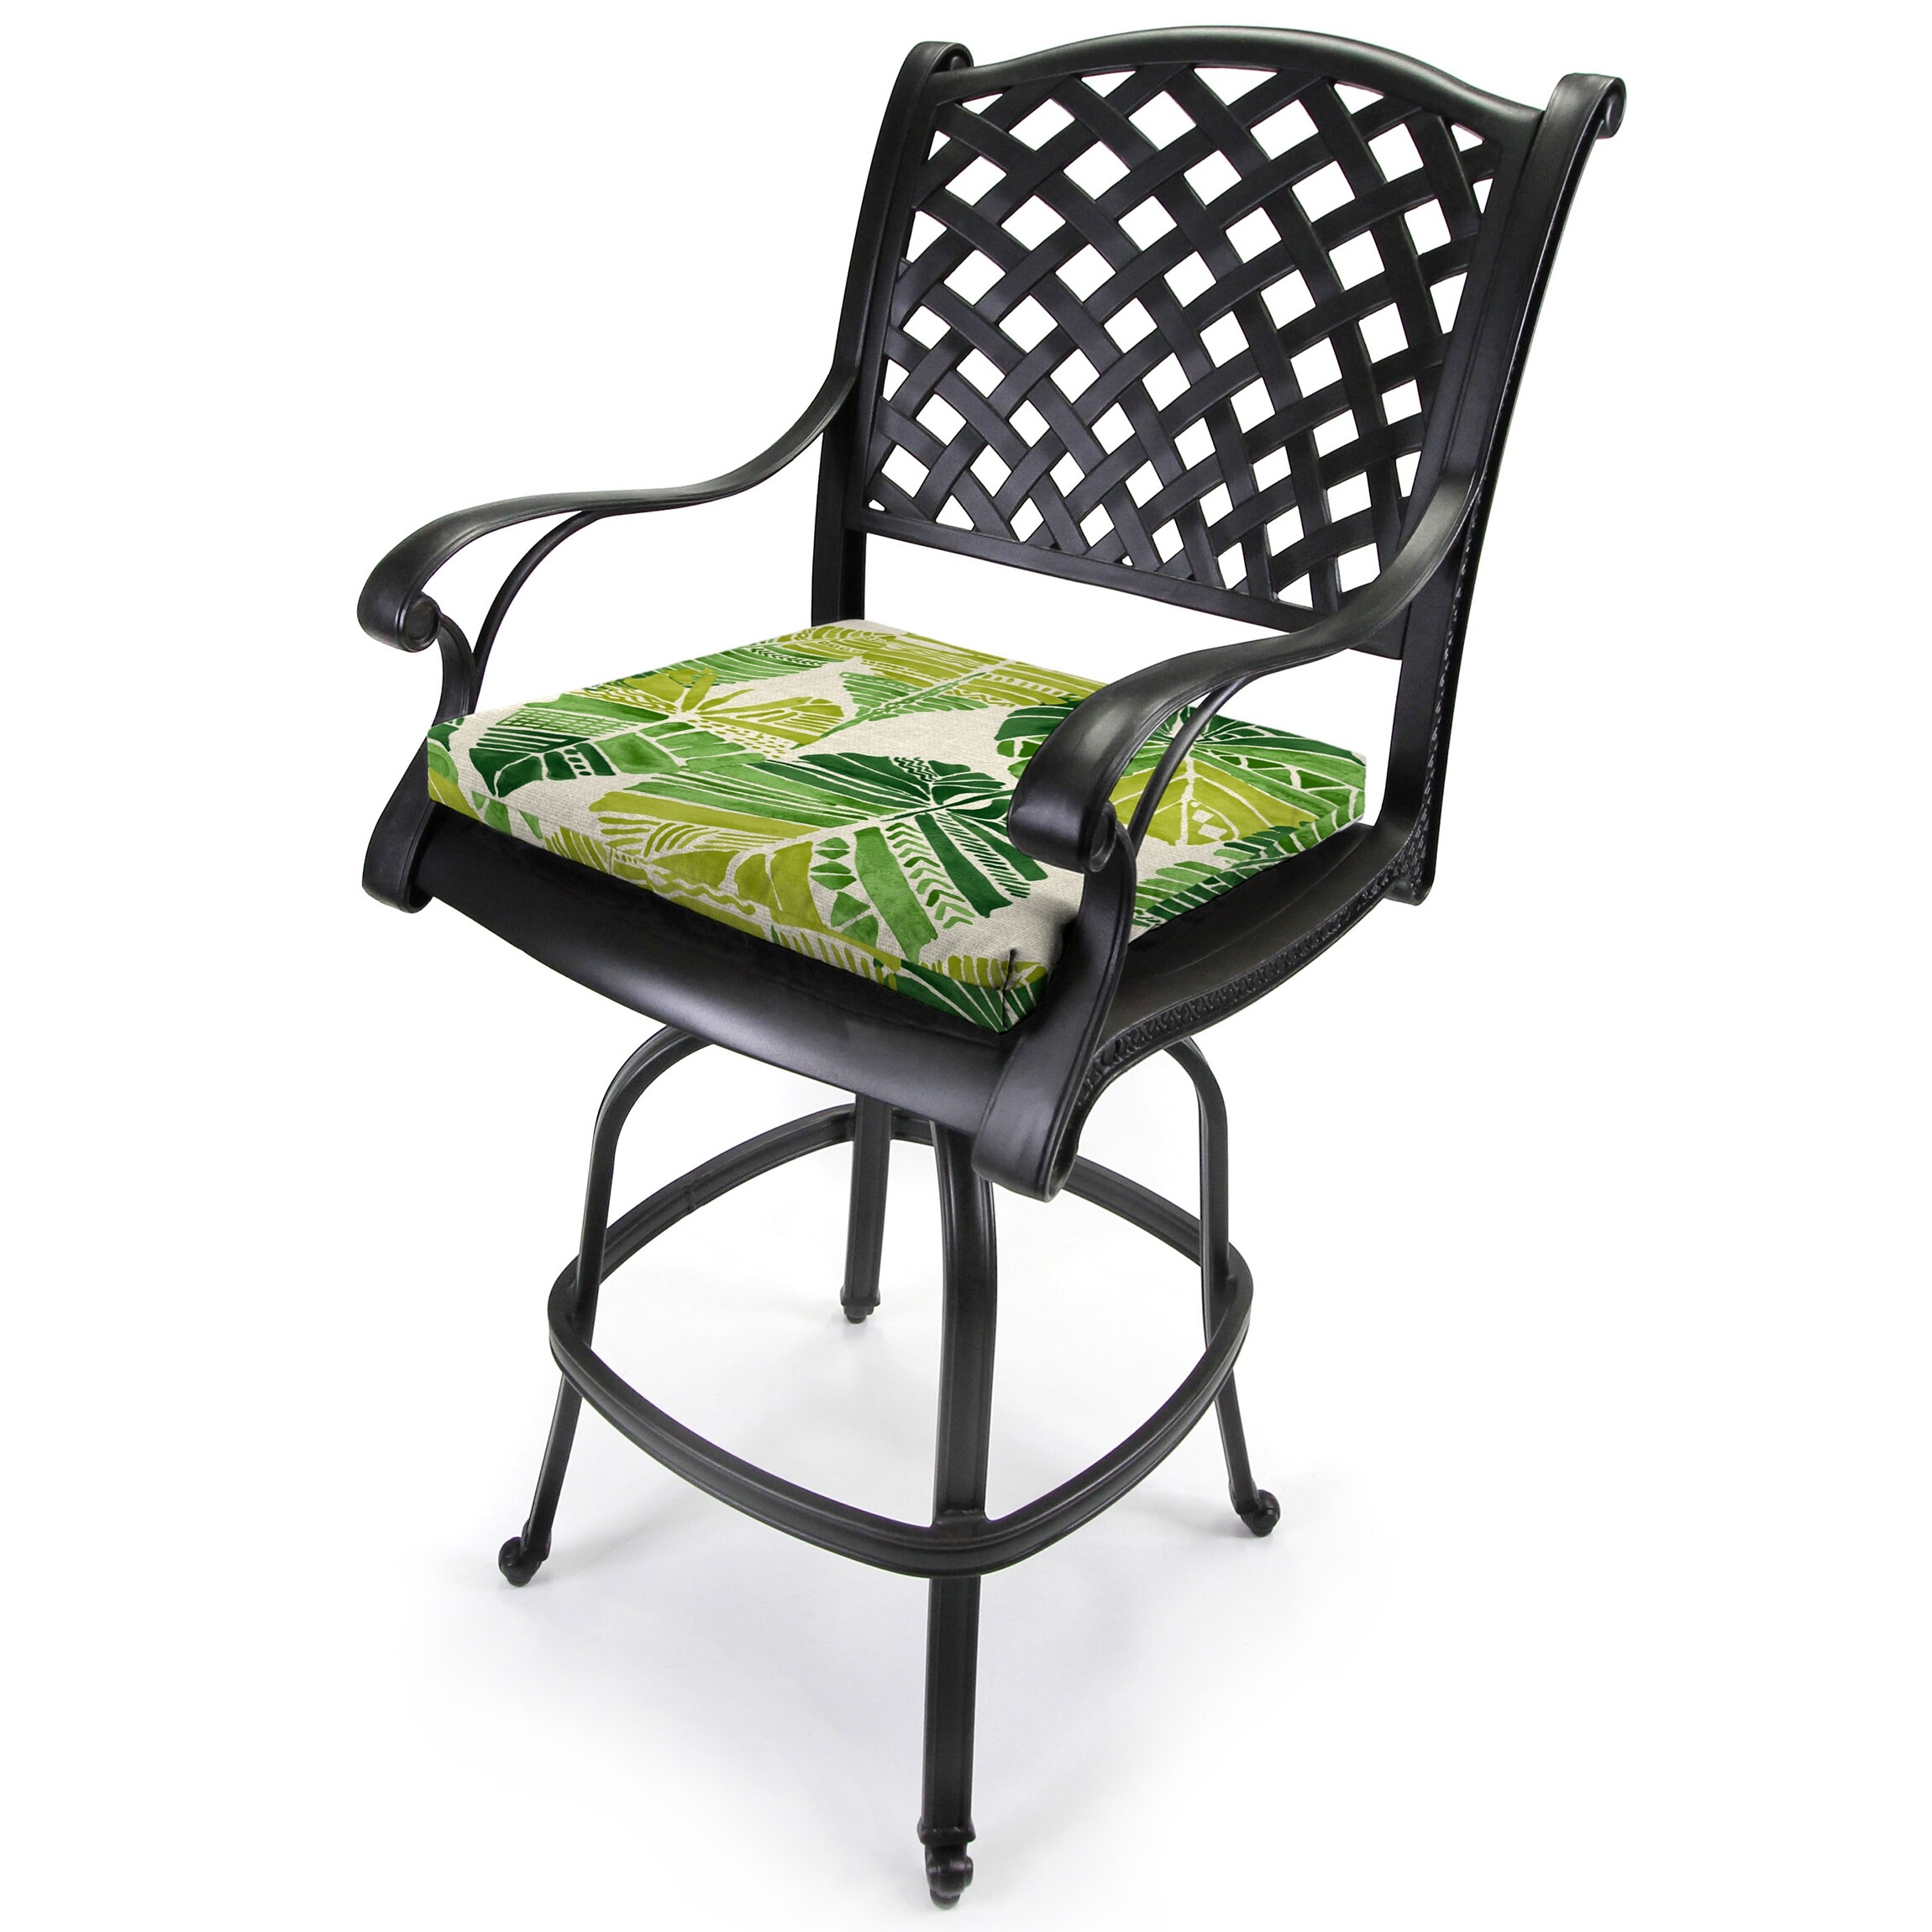 JOYSIDE 17 in. x 18.5 in. Outdoor Chair Cushions Patio Seat